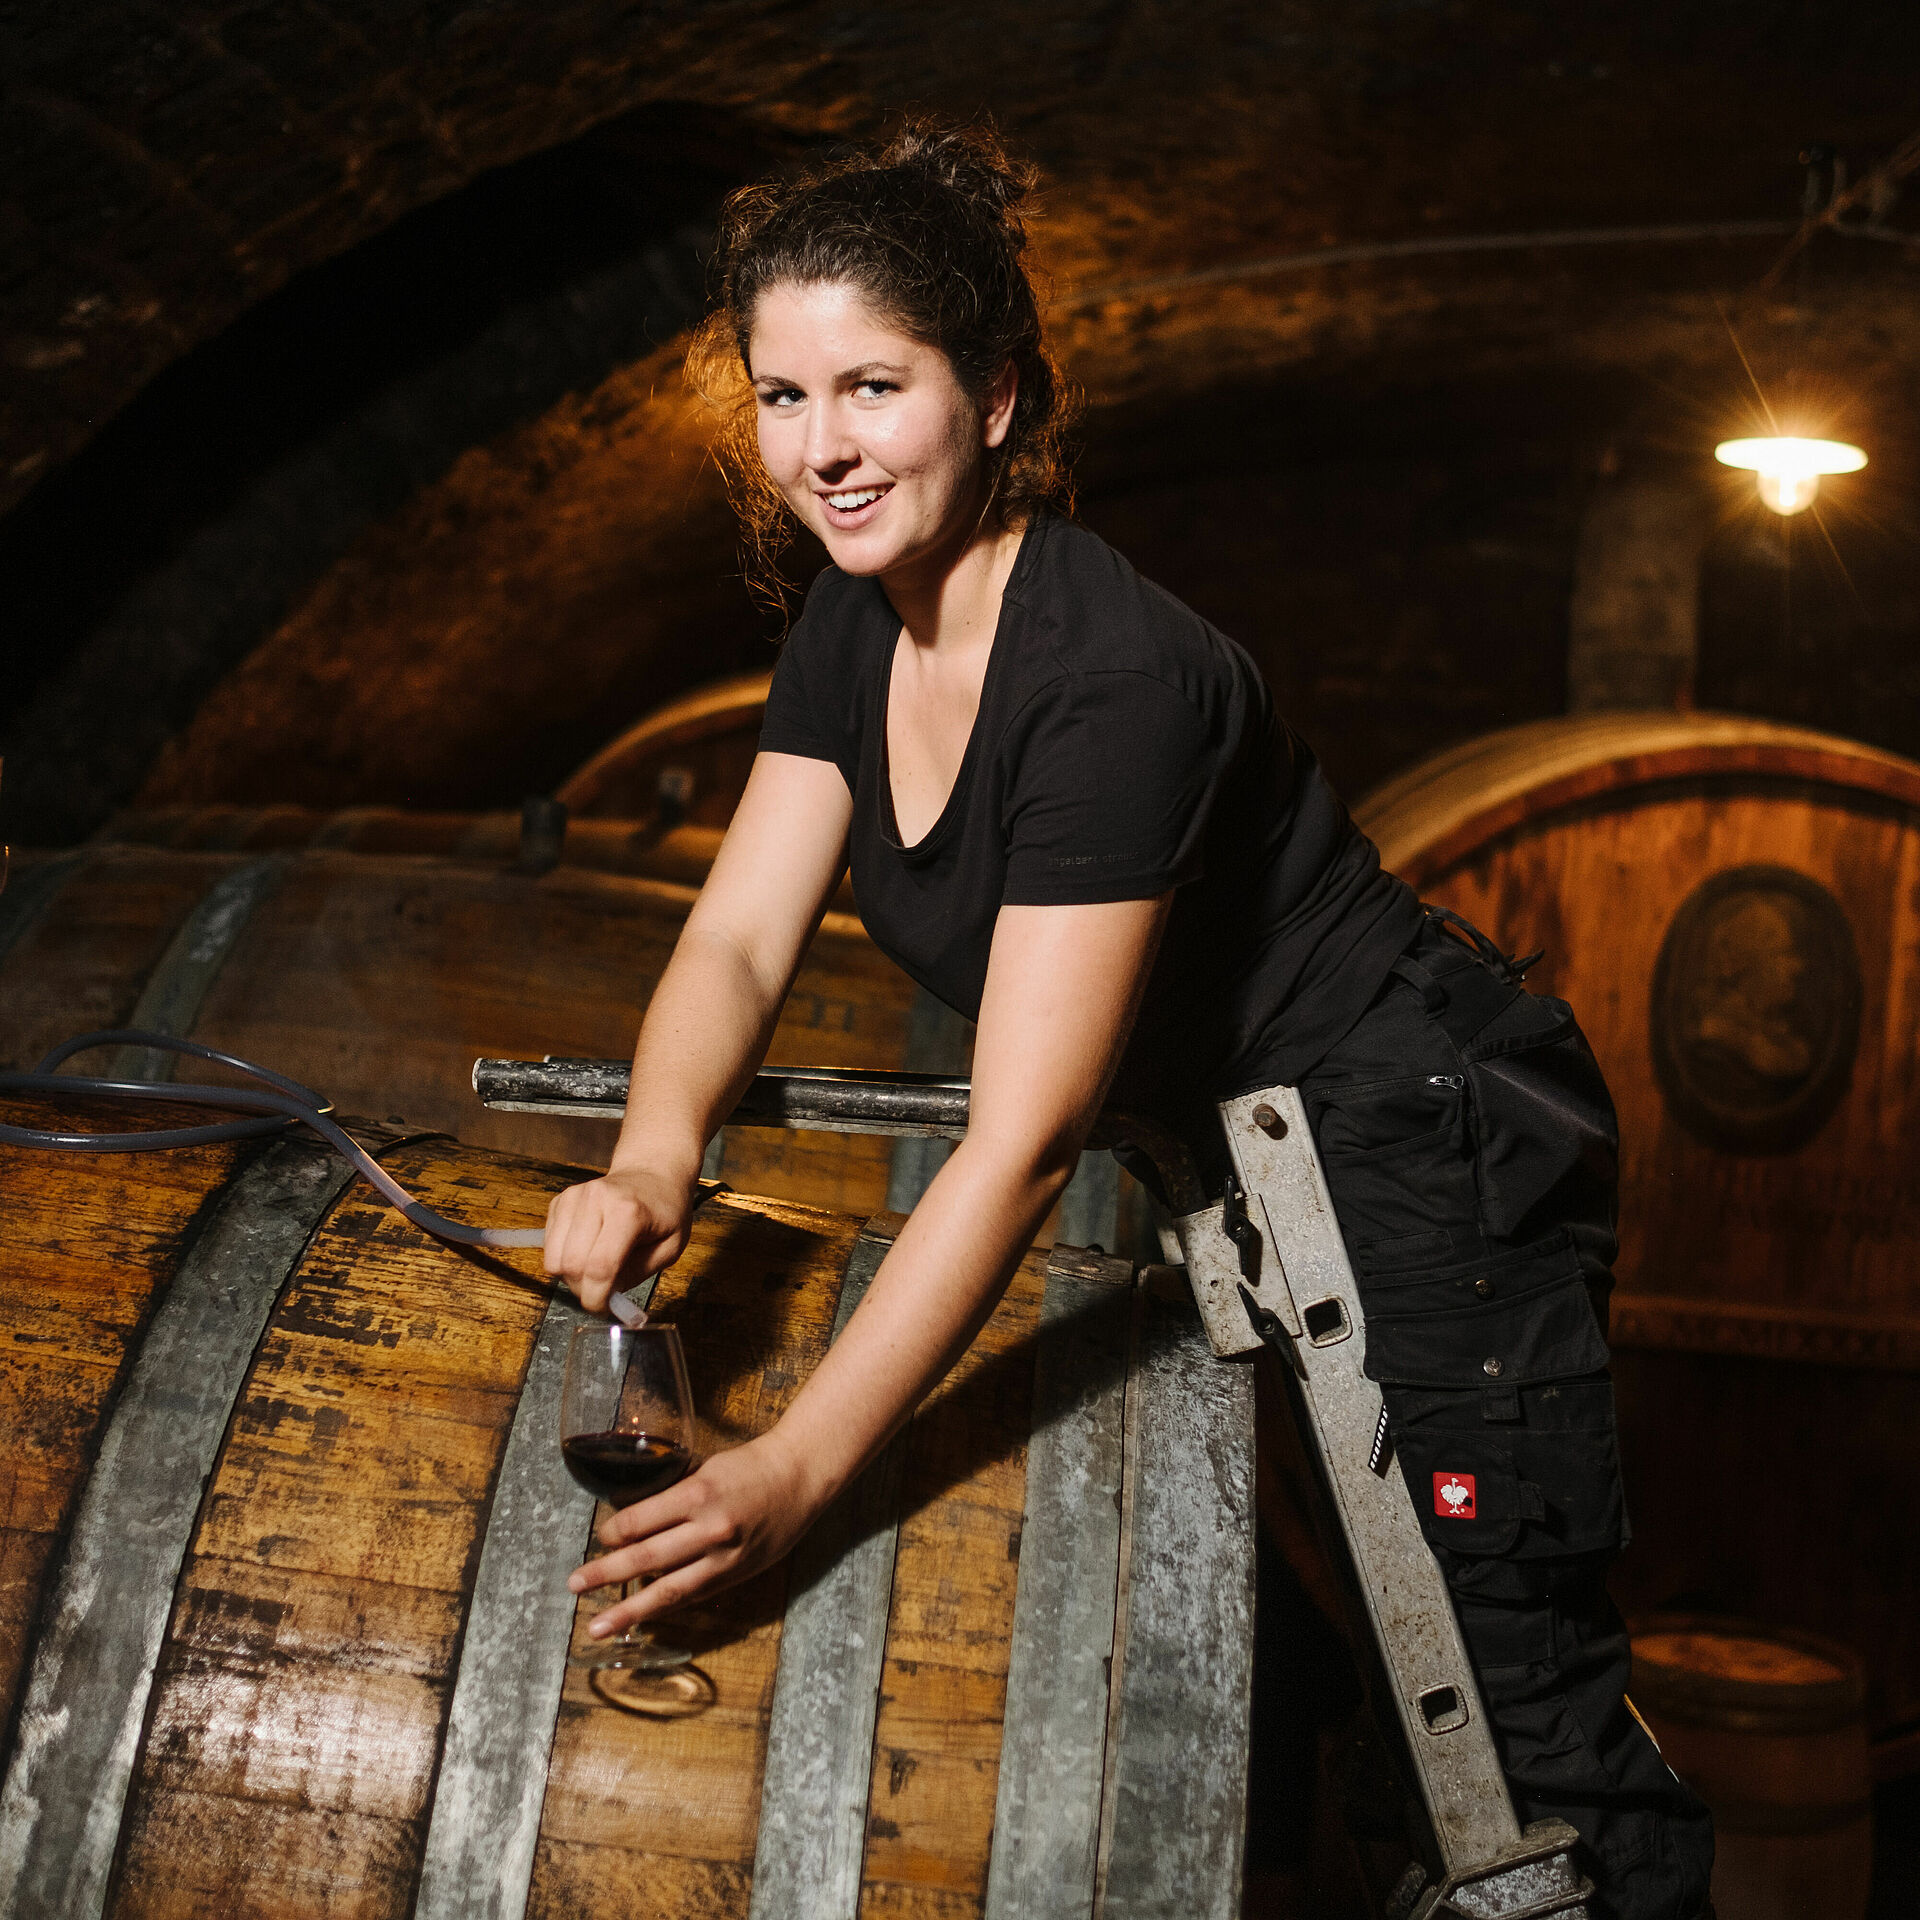 Viniculture student sampling a red wine in the barrique cellar of her cooperative in Neustadt